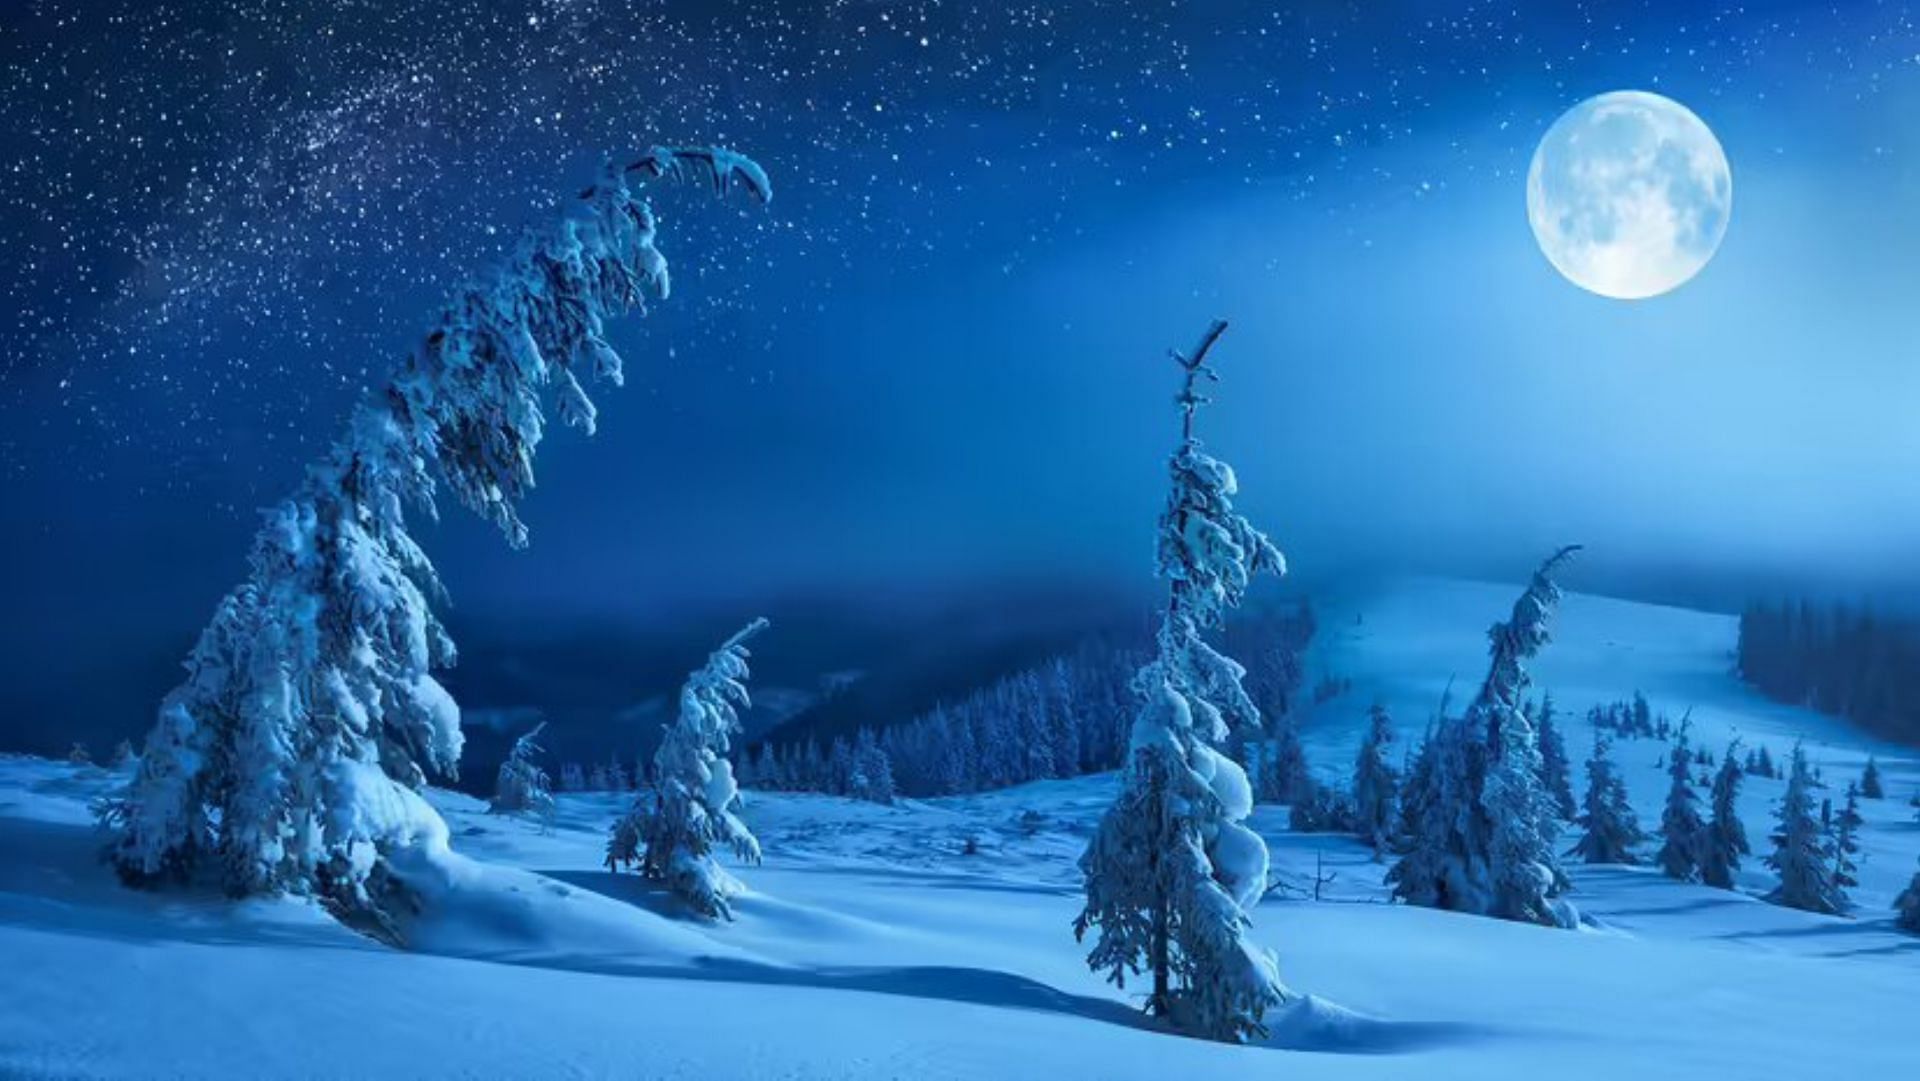 The 2023 Snow Moon will appear on February 5. (Image via Shutterstock)